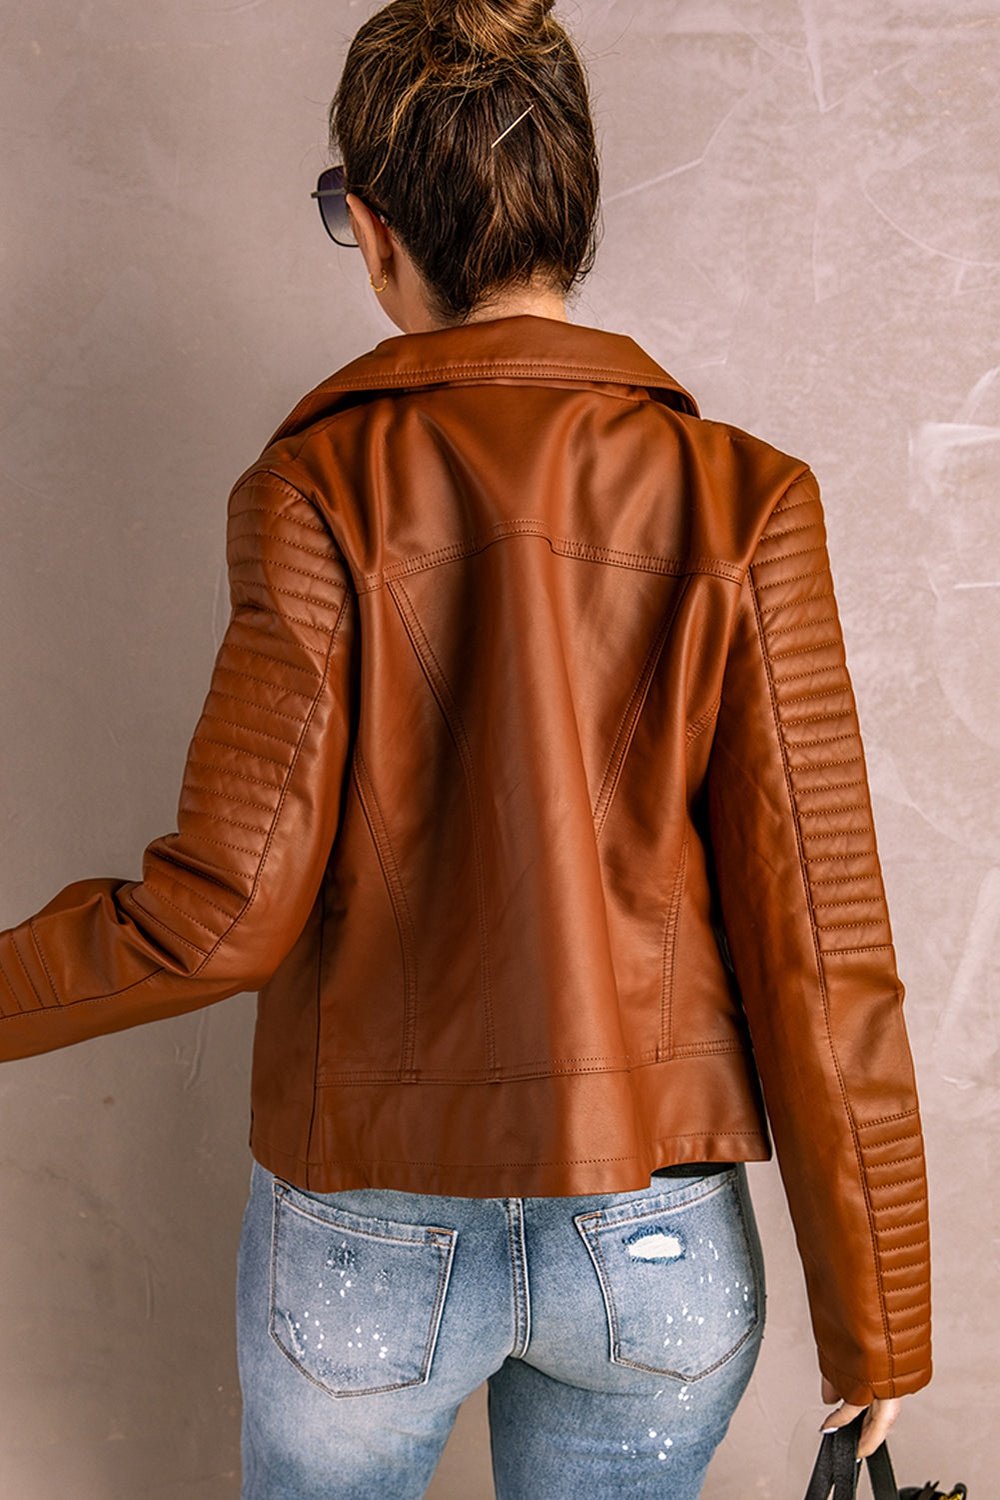 Ribbed Faux Leather Jacket - Jackets - FITGGINS